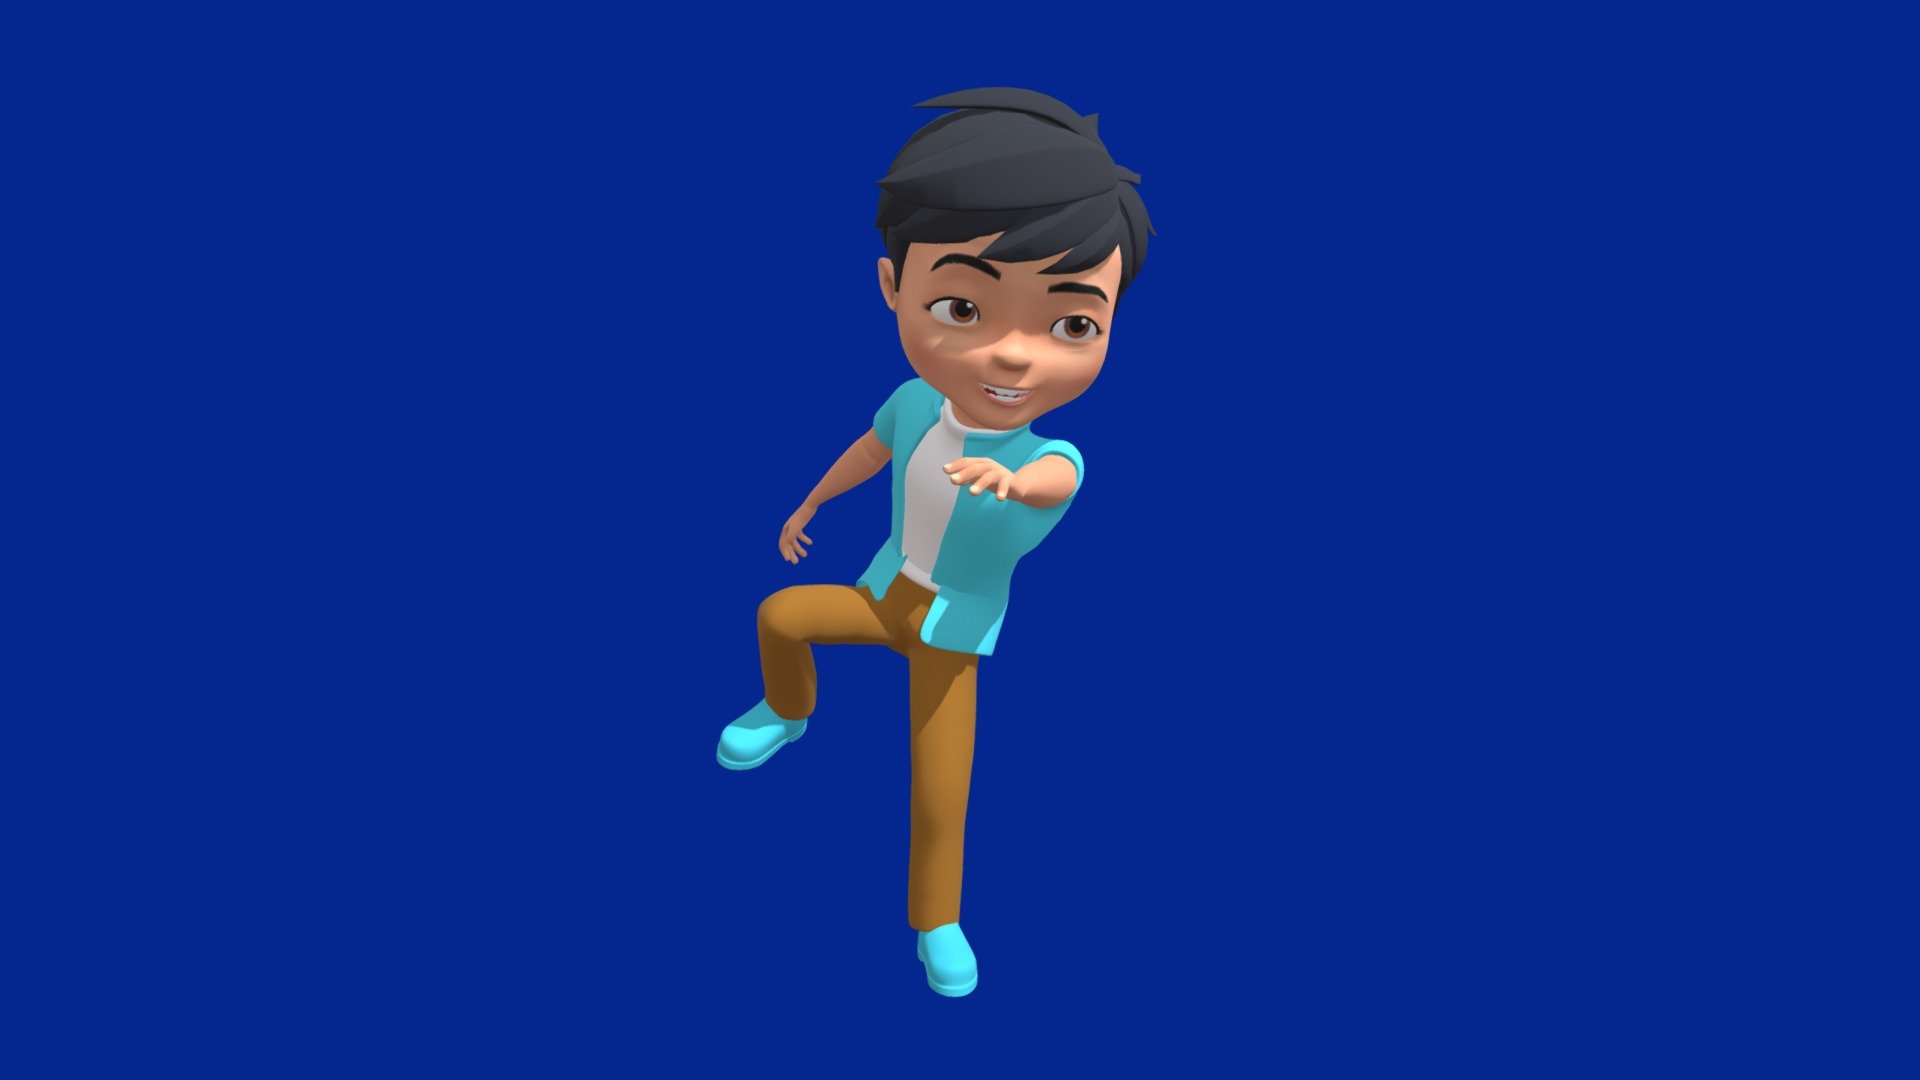 Cartoon kid 3d model made in blender.
This model is rigged ,animated and ready to use .
You can use it for youtube and game making.
feel free to message me and ask me anything.
mostafaebrahiem1998@gmail.com - Animated Cartoon Kid - Buy Royalty Free 3D model by Mostafa Ebrahim (@mostafaebrahiem1998) 3d model